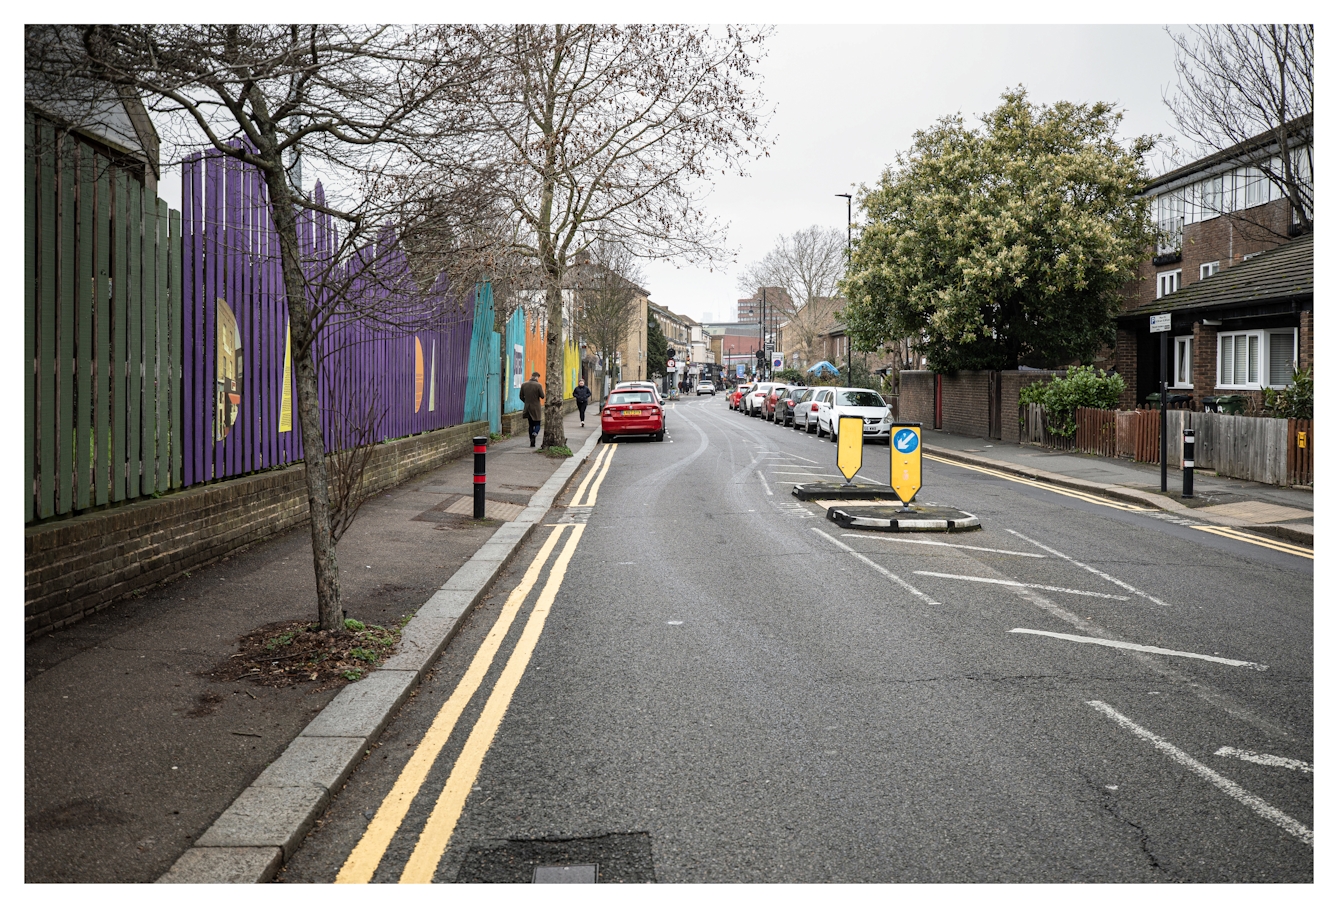 Photograph of a South London street scene in Brixton, showing a straight road receding into the distance. On the left side of the road is a row of colourful vertical wooden fencing, flanked by young trees spaced out in the pavement. On the right side of the road are residential buildings. In the middle of the road is an island with two yellow roadsigns, which are complimented by the double yellow parking restriction lines on the edge of the road.